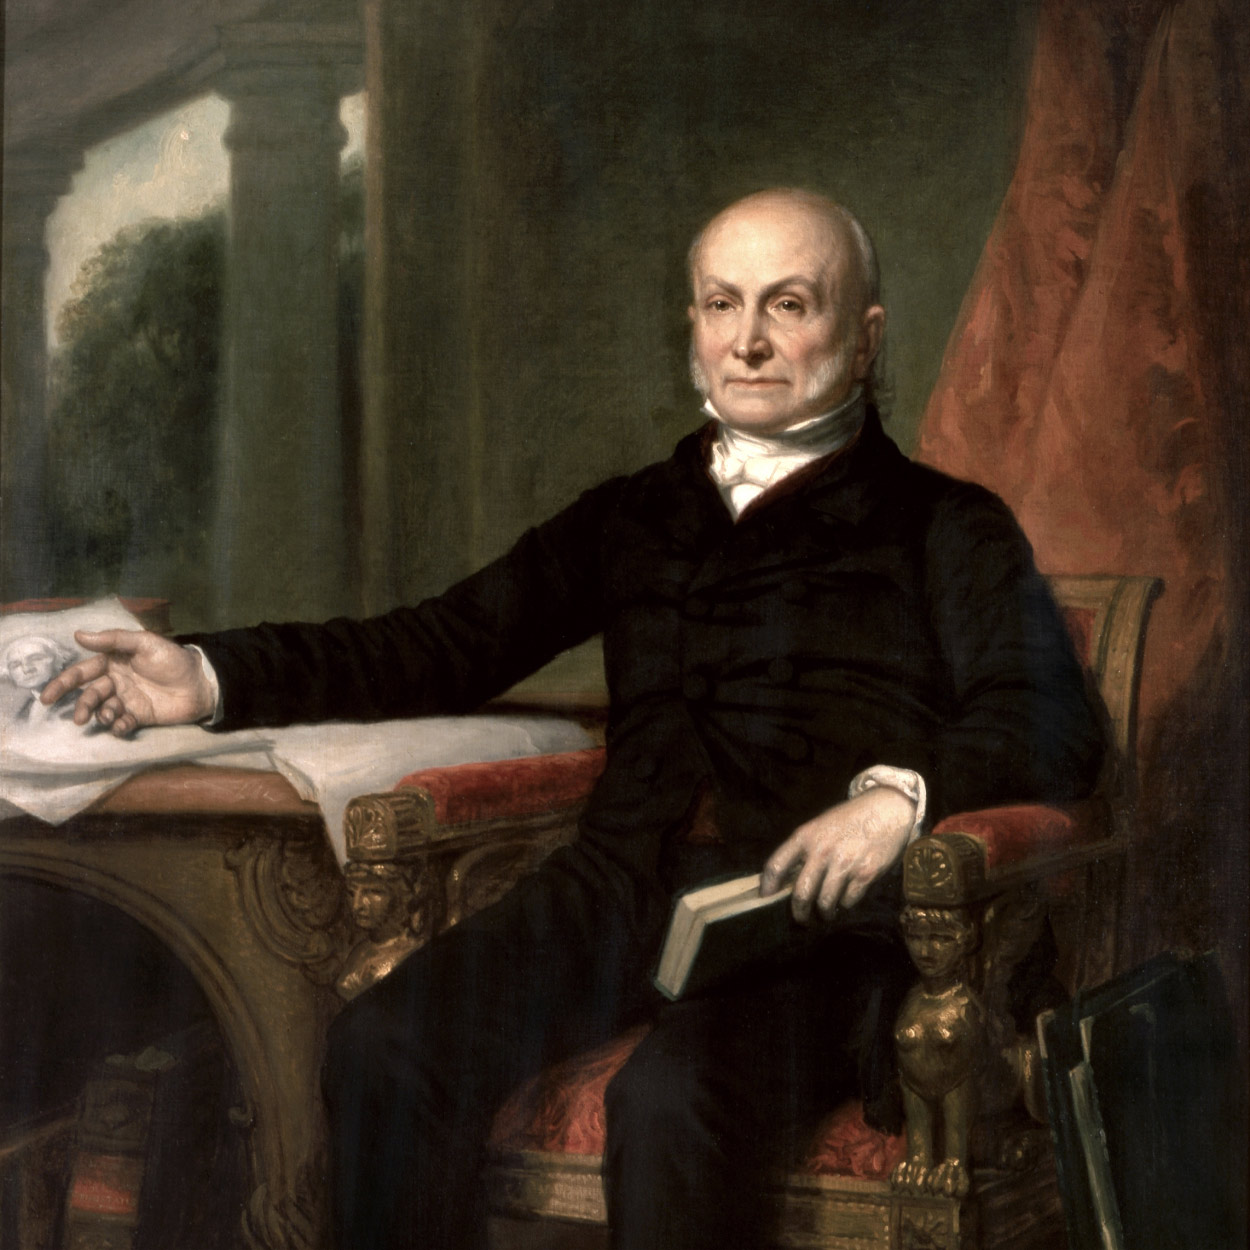 Portrait of John Quincy Adams, the 6th President of the United States